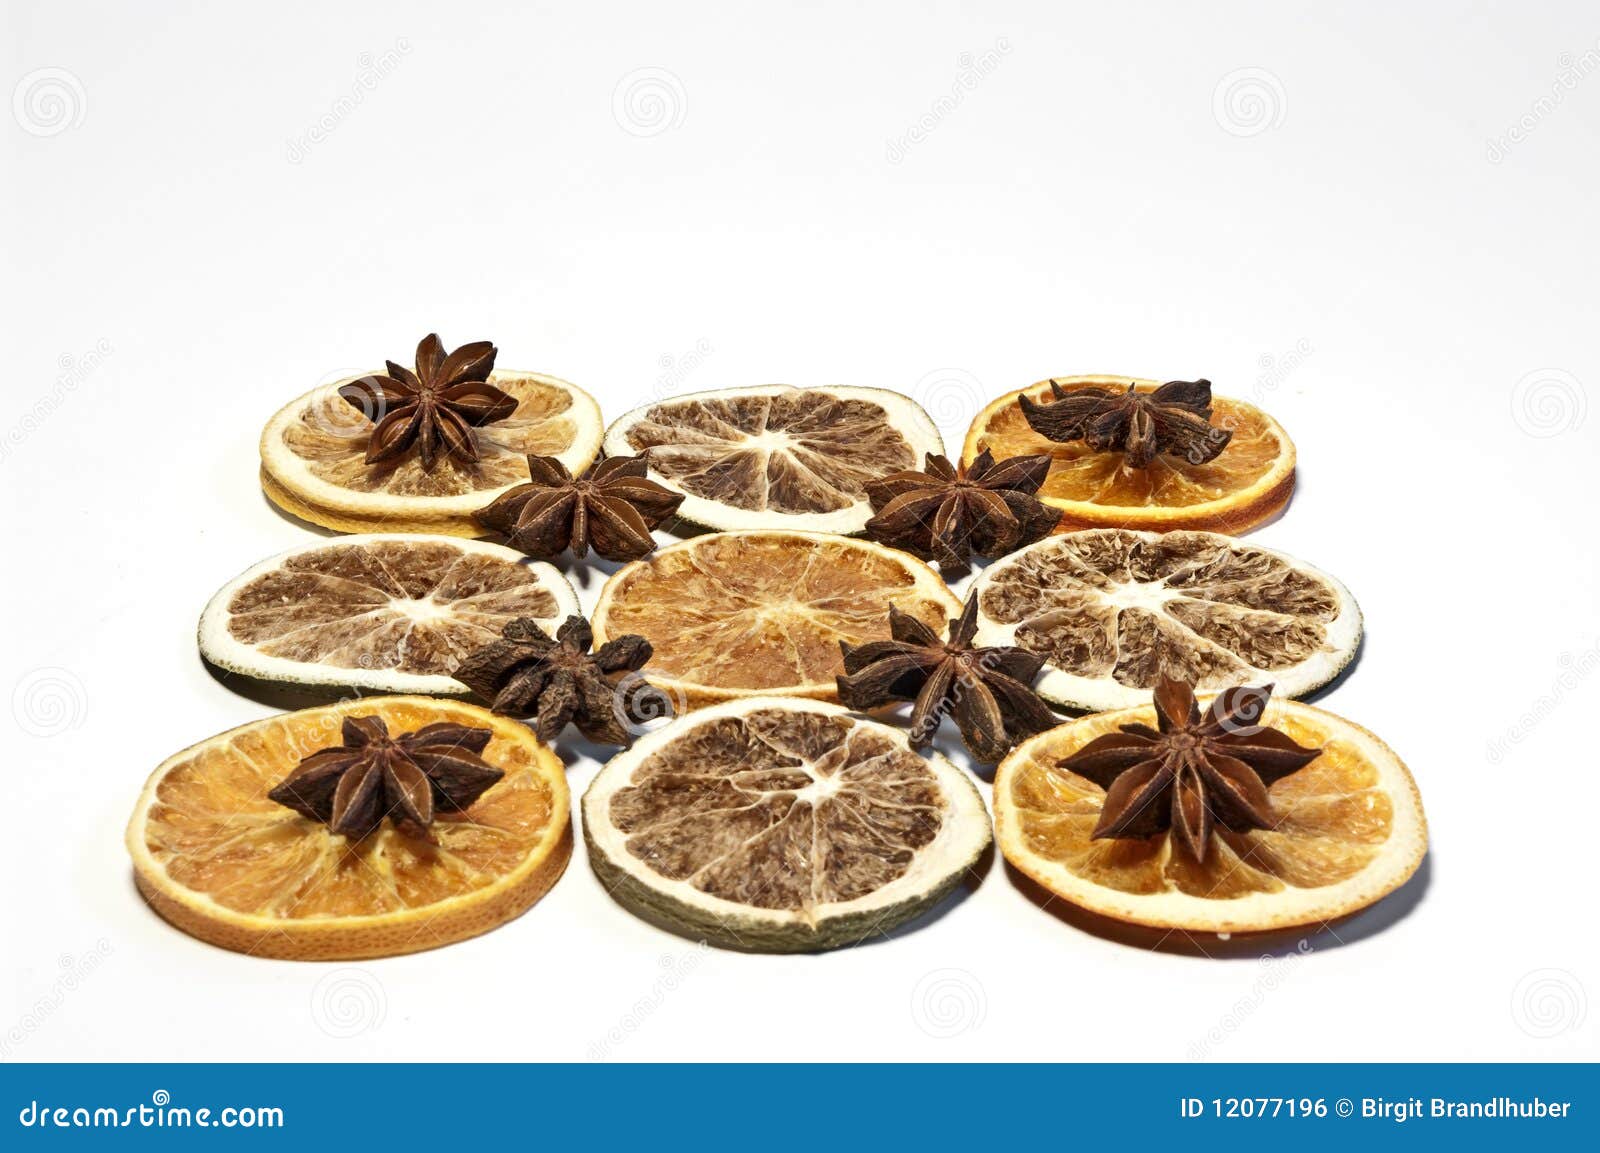 pattern with dried fruits